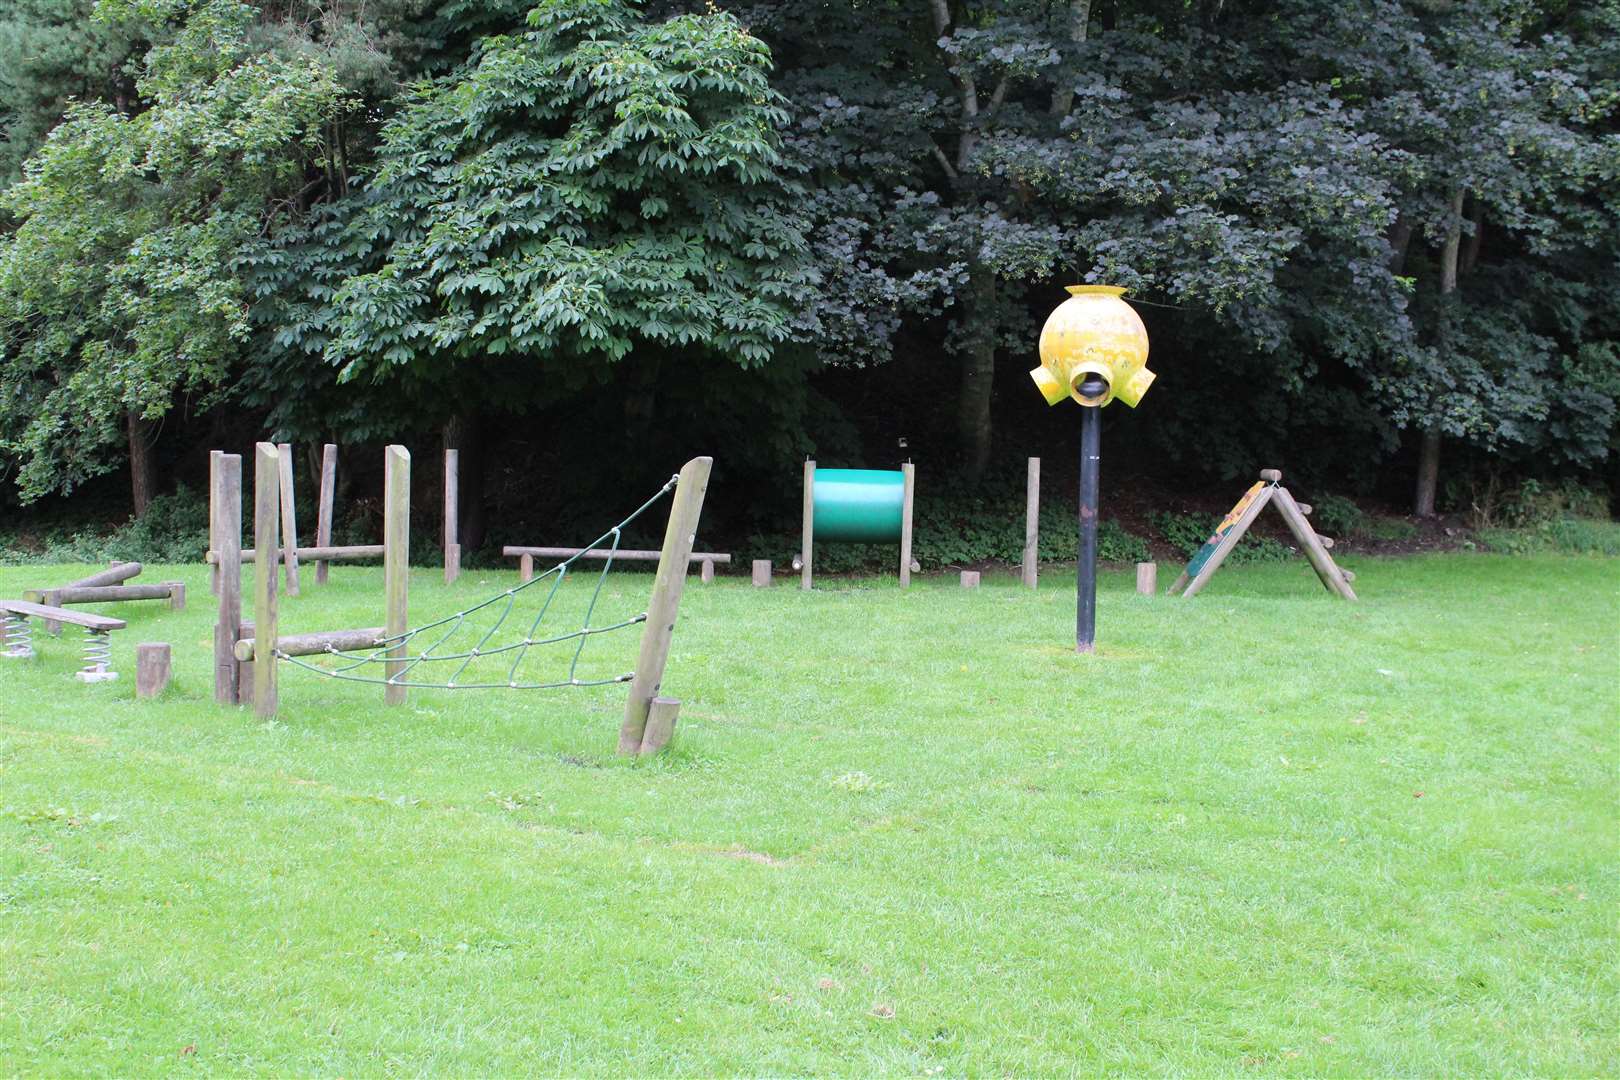 The Markethill School equipment has been added to the Den's park.